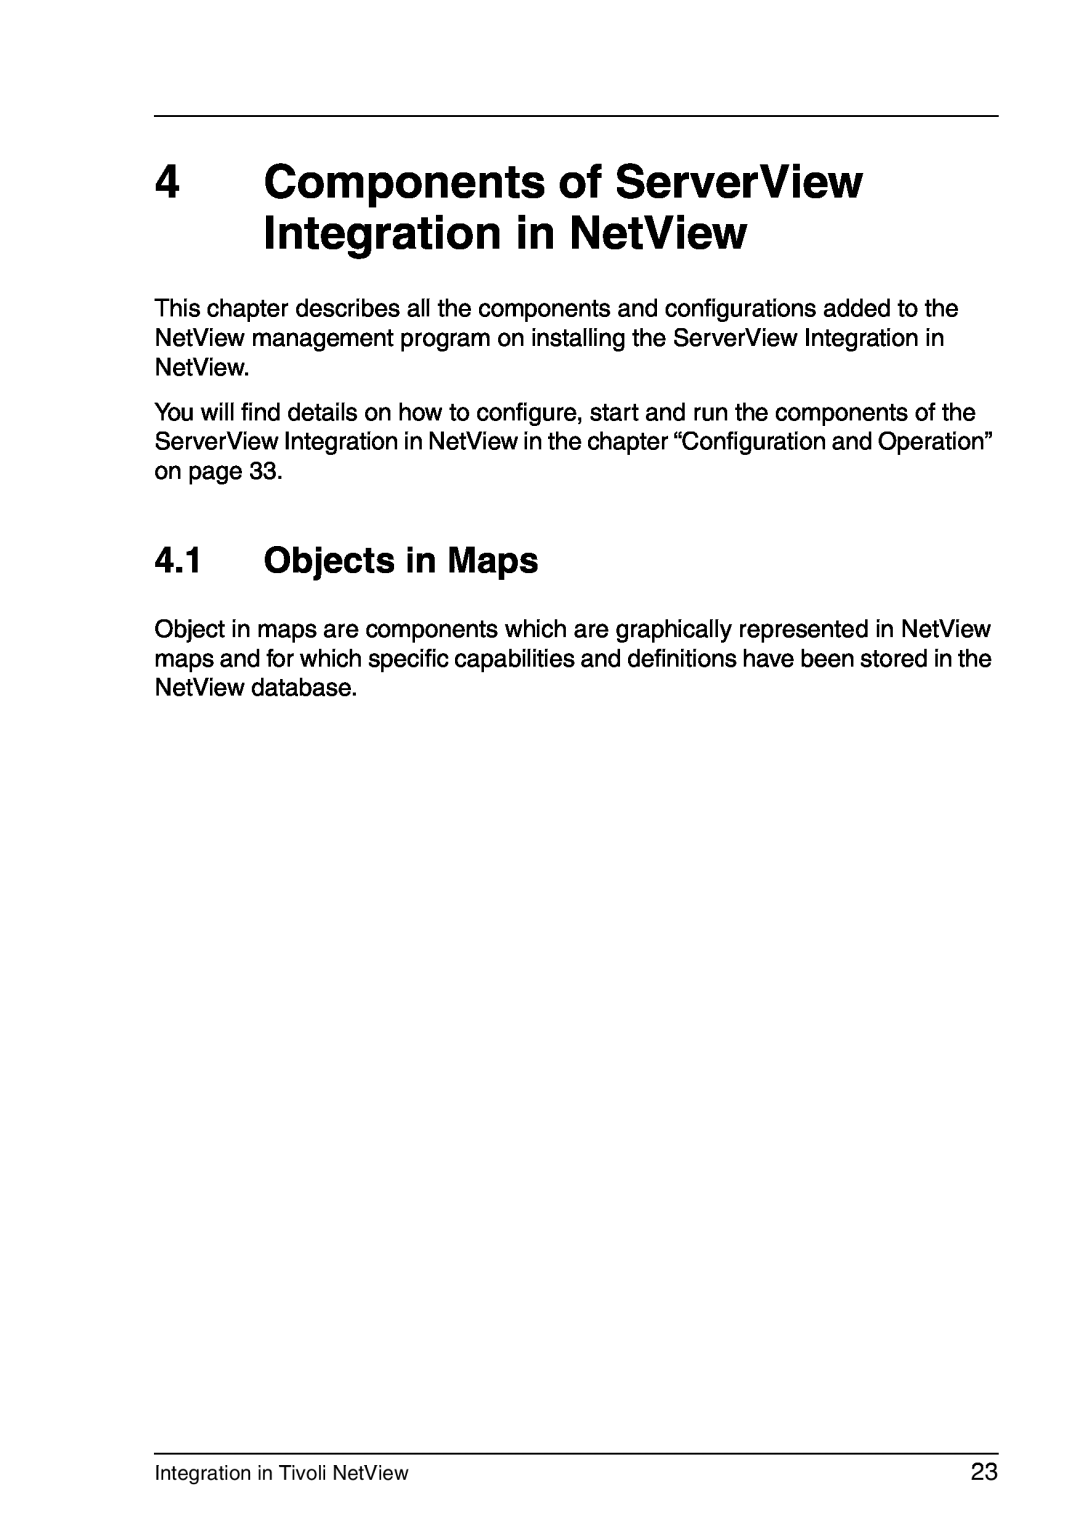 3D Connexion TivoII manual 4Components of ServerView Integration in NetView, 4.1Objects in Maps 